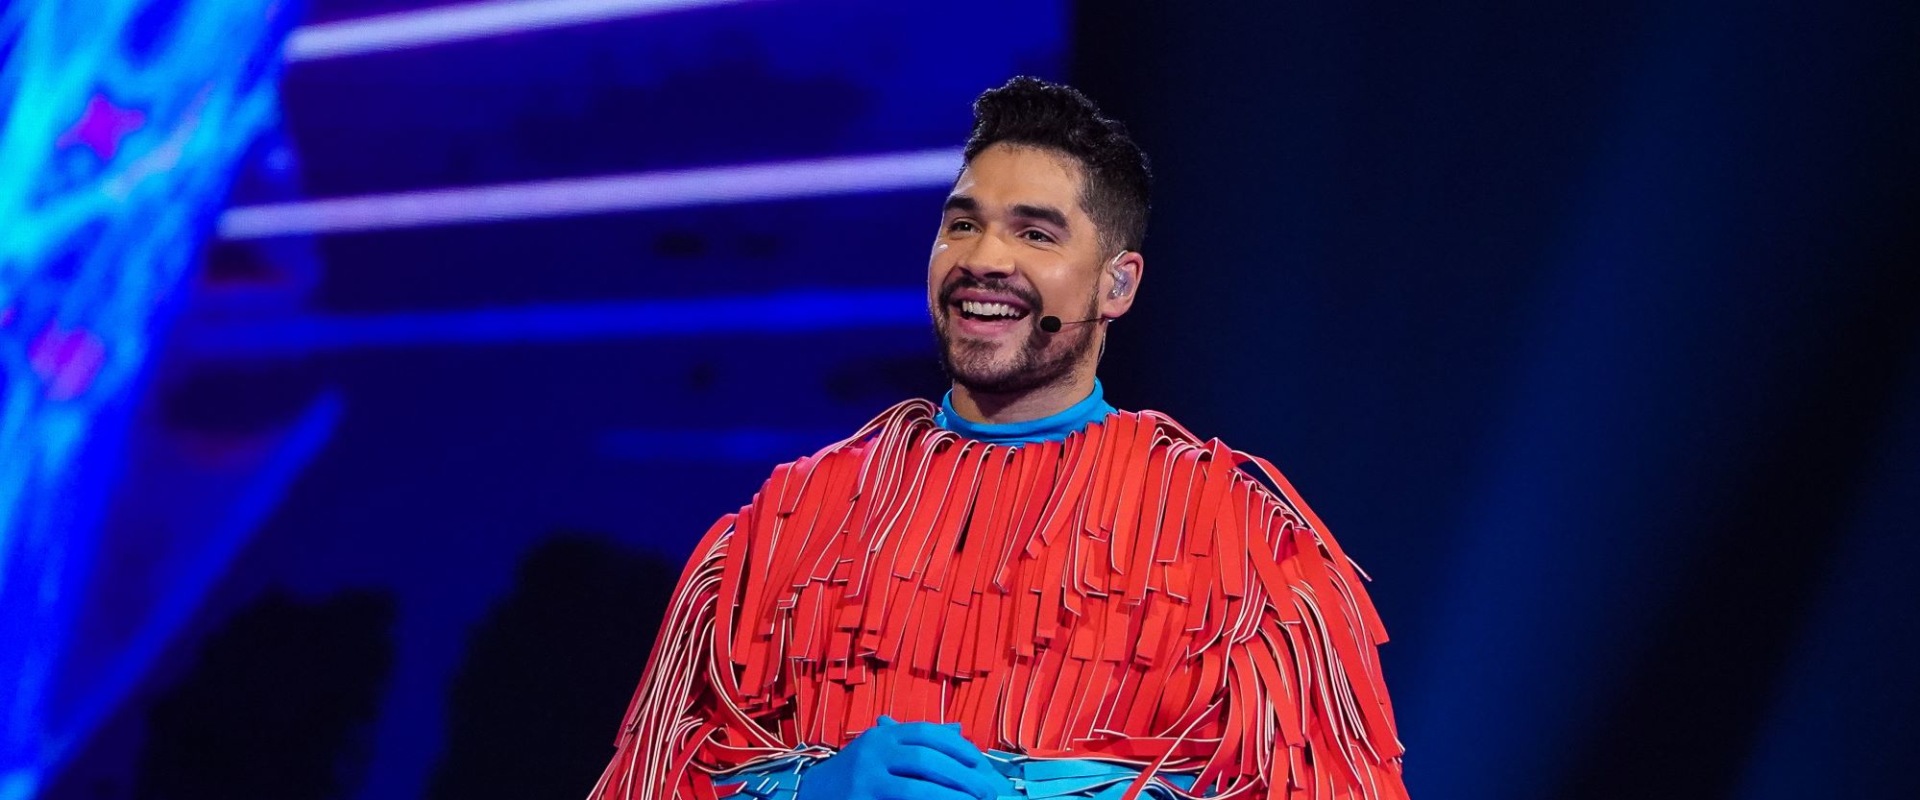 Louis Smith is the Winner of The Masked Dancer